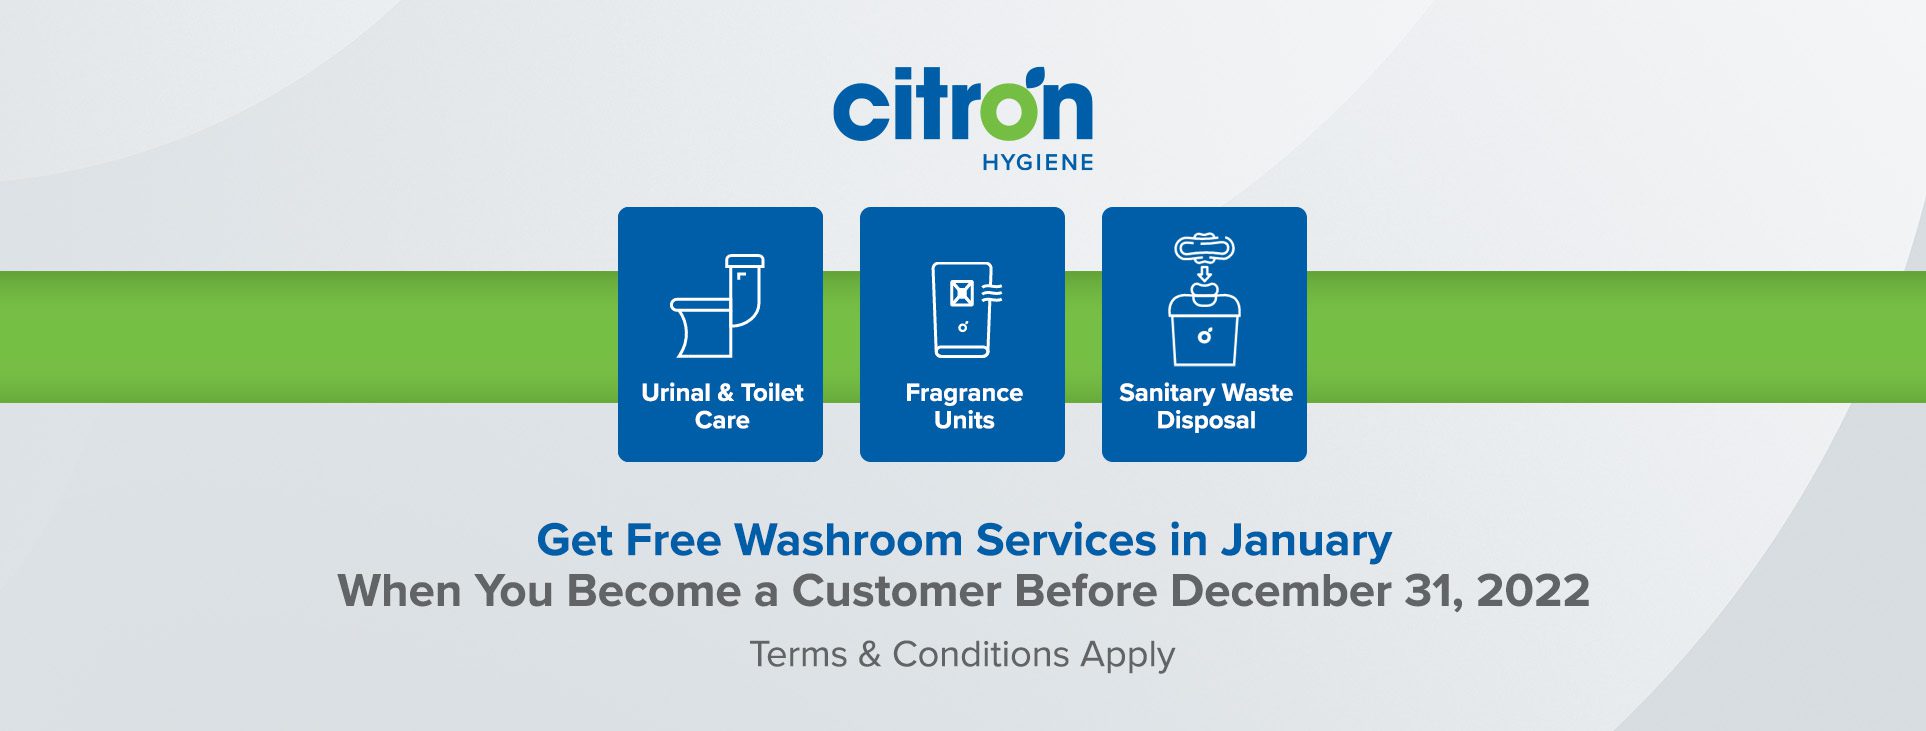 citron-hygiene-free-washroom-services-in-january-offer 